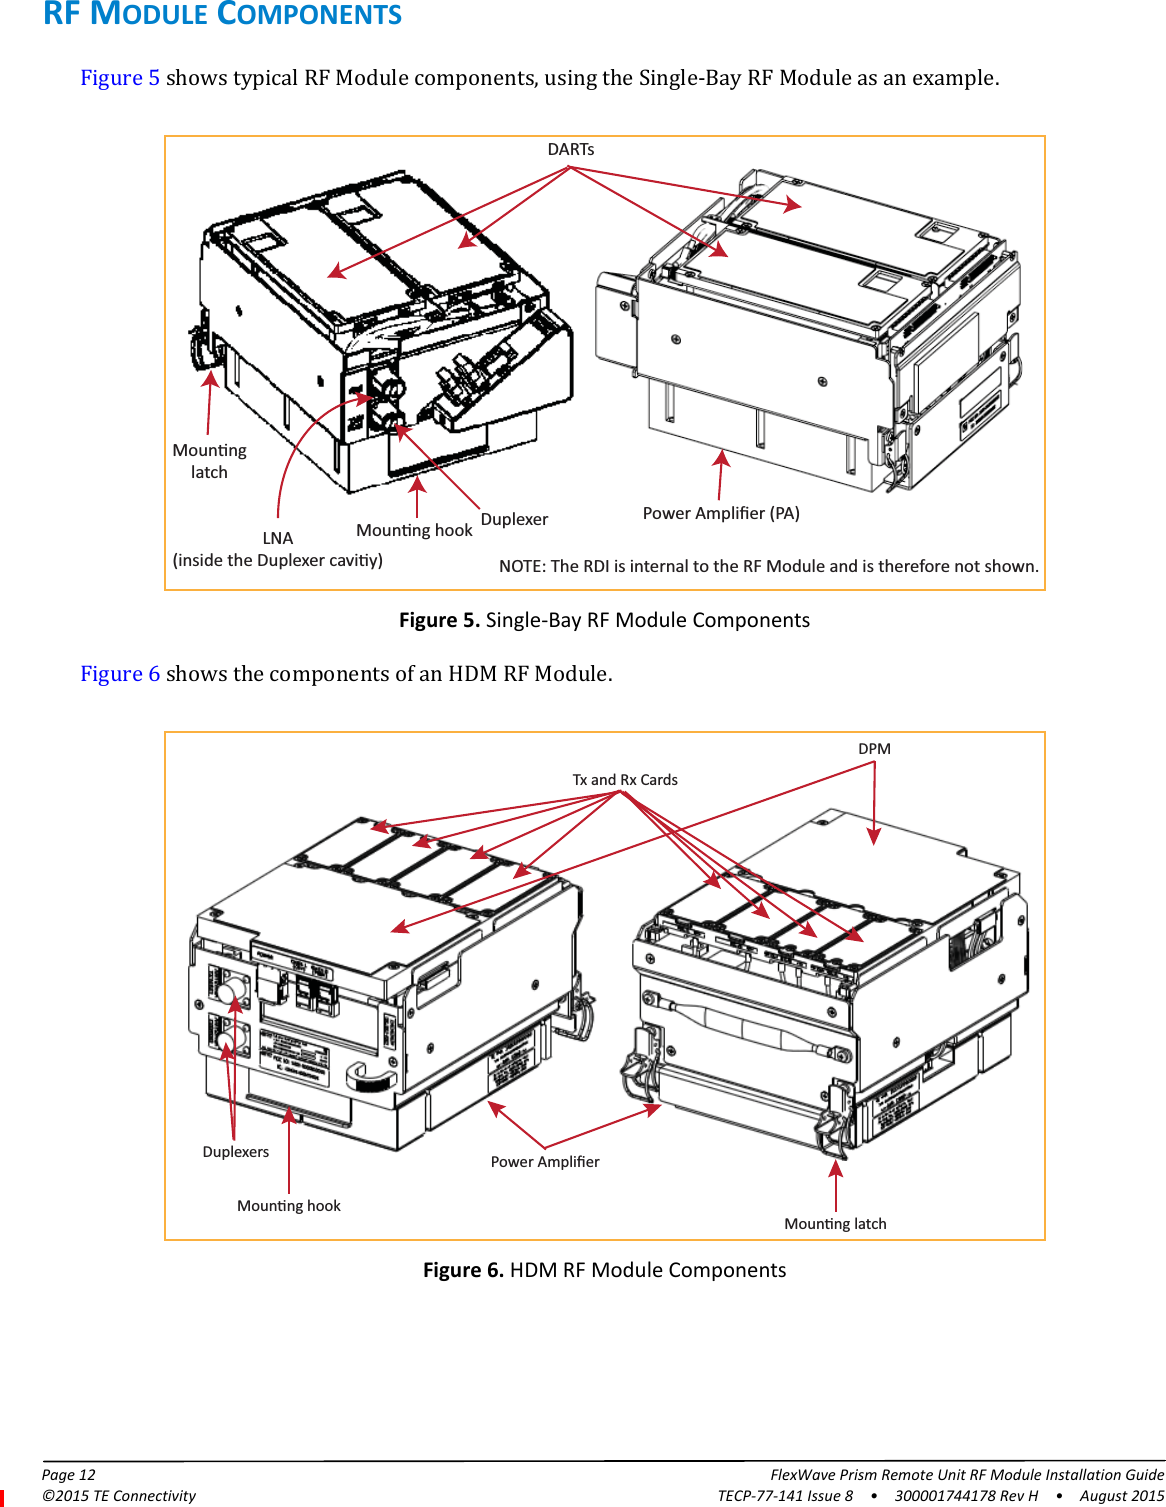 Page 12 FlexWave Prism Remote Unit RF Module Installation Guide©2015 TE Connectivity TECP-77-141 Issue 8  •  300001744178 Rev H  •  August 2015RF MODULE COMPONENTSFigure 5 shows typical RF Module components, using the Single-Bay RF Module as an example.MounnglatchMounng hook Duplexer Power Ampliﬁer (PA)DARTsNOTE: The RDI is internal to the RF Module and is therefore not shown.LNA(inside the Duplexer caviy)Figure 5. Single-Bay RF Module ComponentsFigure 6 shows the components of an HDM RF Module.Duplexers Power AmpliﬁerMounng latchMounng hookTx and Rx CardsDPMFigure 6. HDM RF Module Components